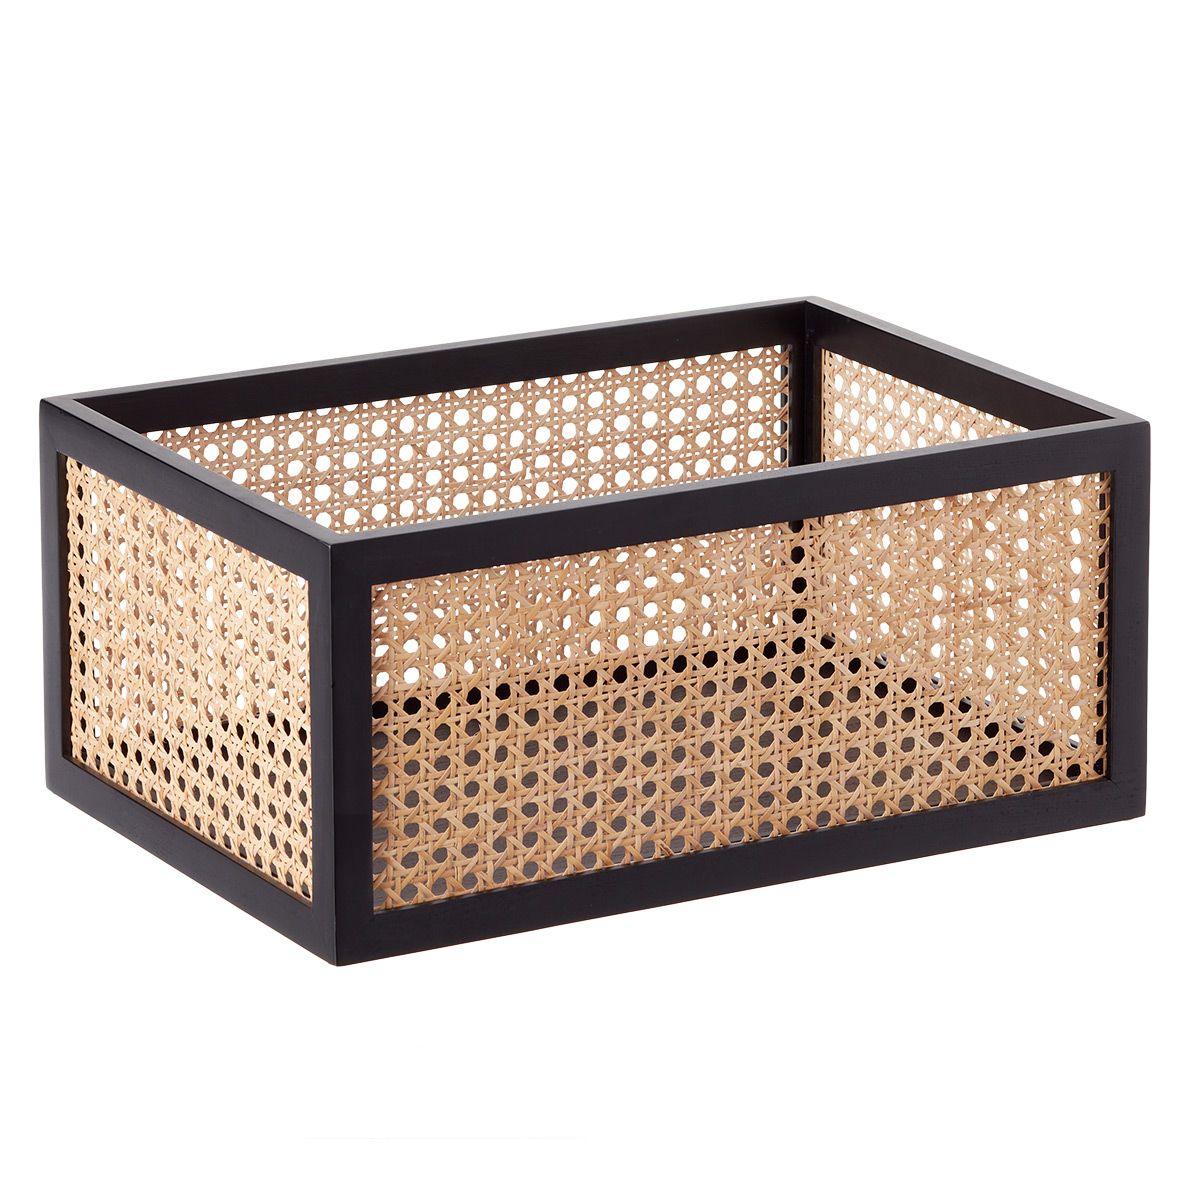 The Container Store Artisan Rattan Cane Bin Black | The Container Store